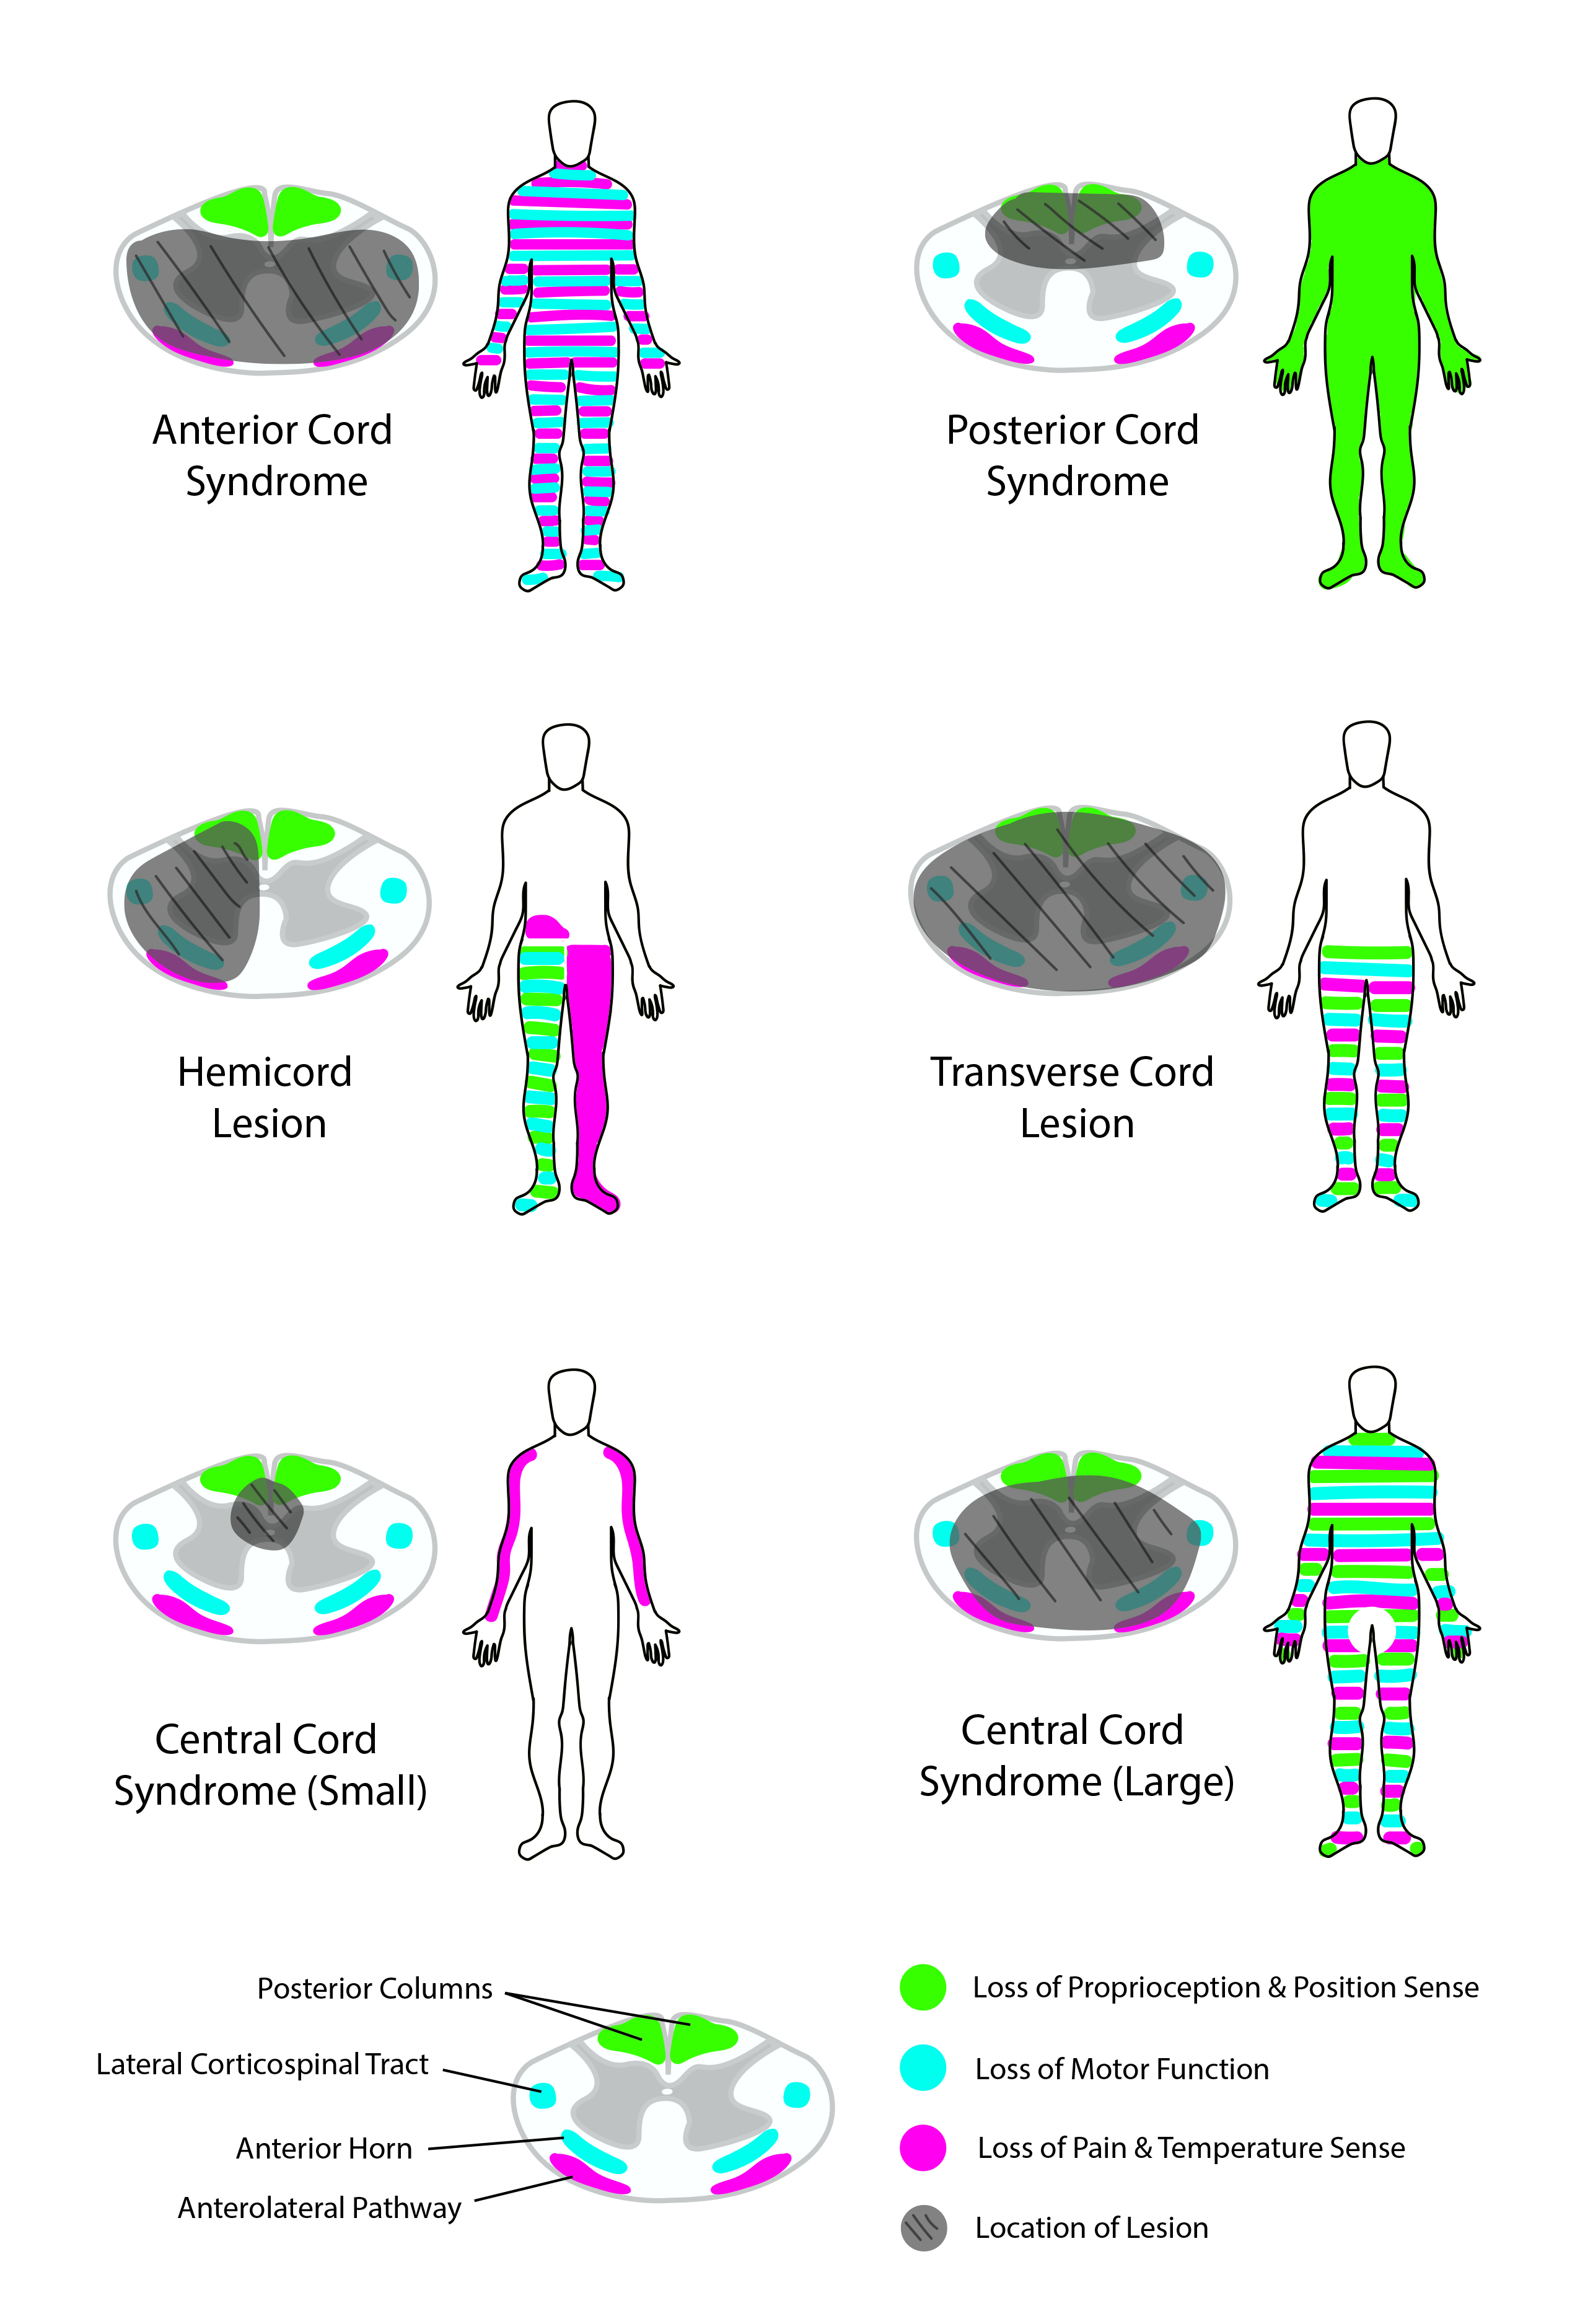 <p>Spinal Cord Syndromes. This image shows&nbsp;the spinal cord syndromes and the neurological deficits they may cause.</p>